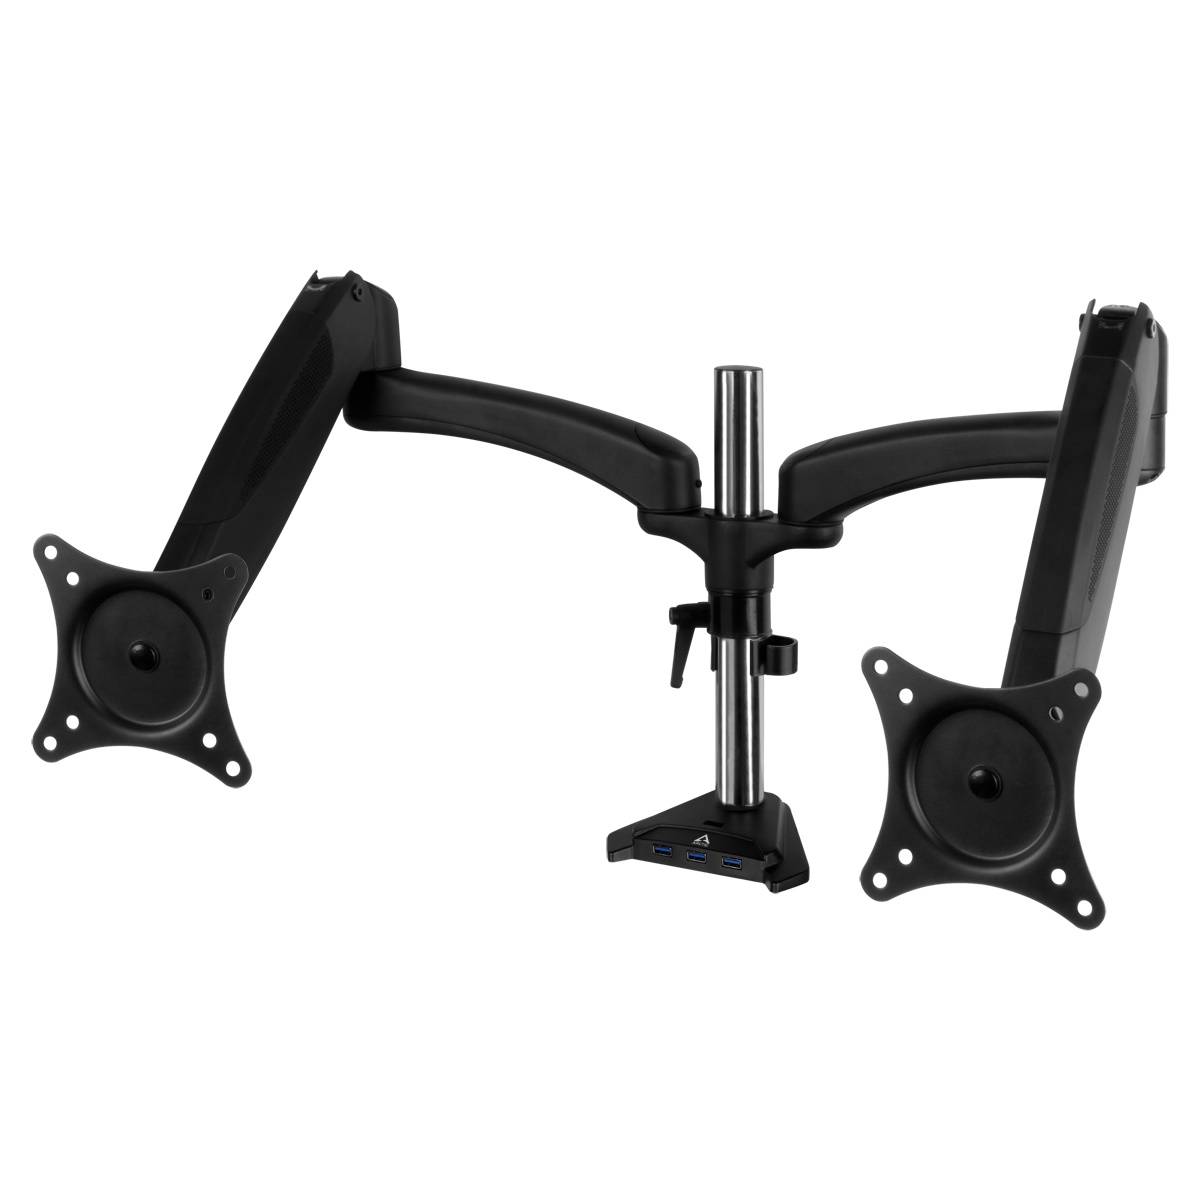 ARCTIC Z2-3D Gen 3 – Monitor arm with complete 3D